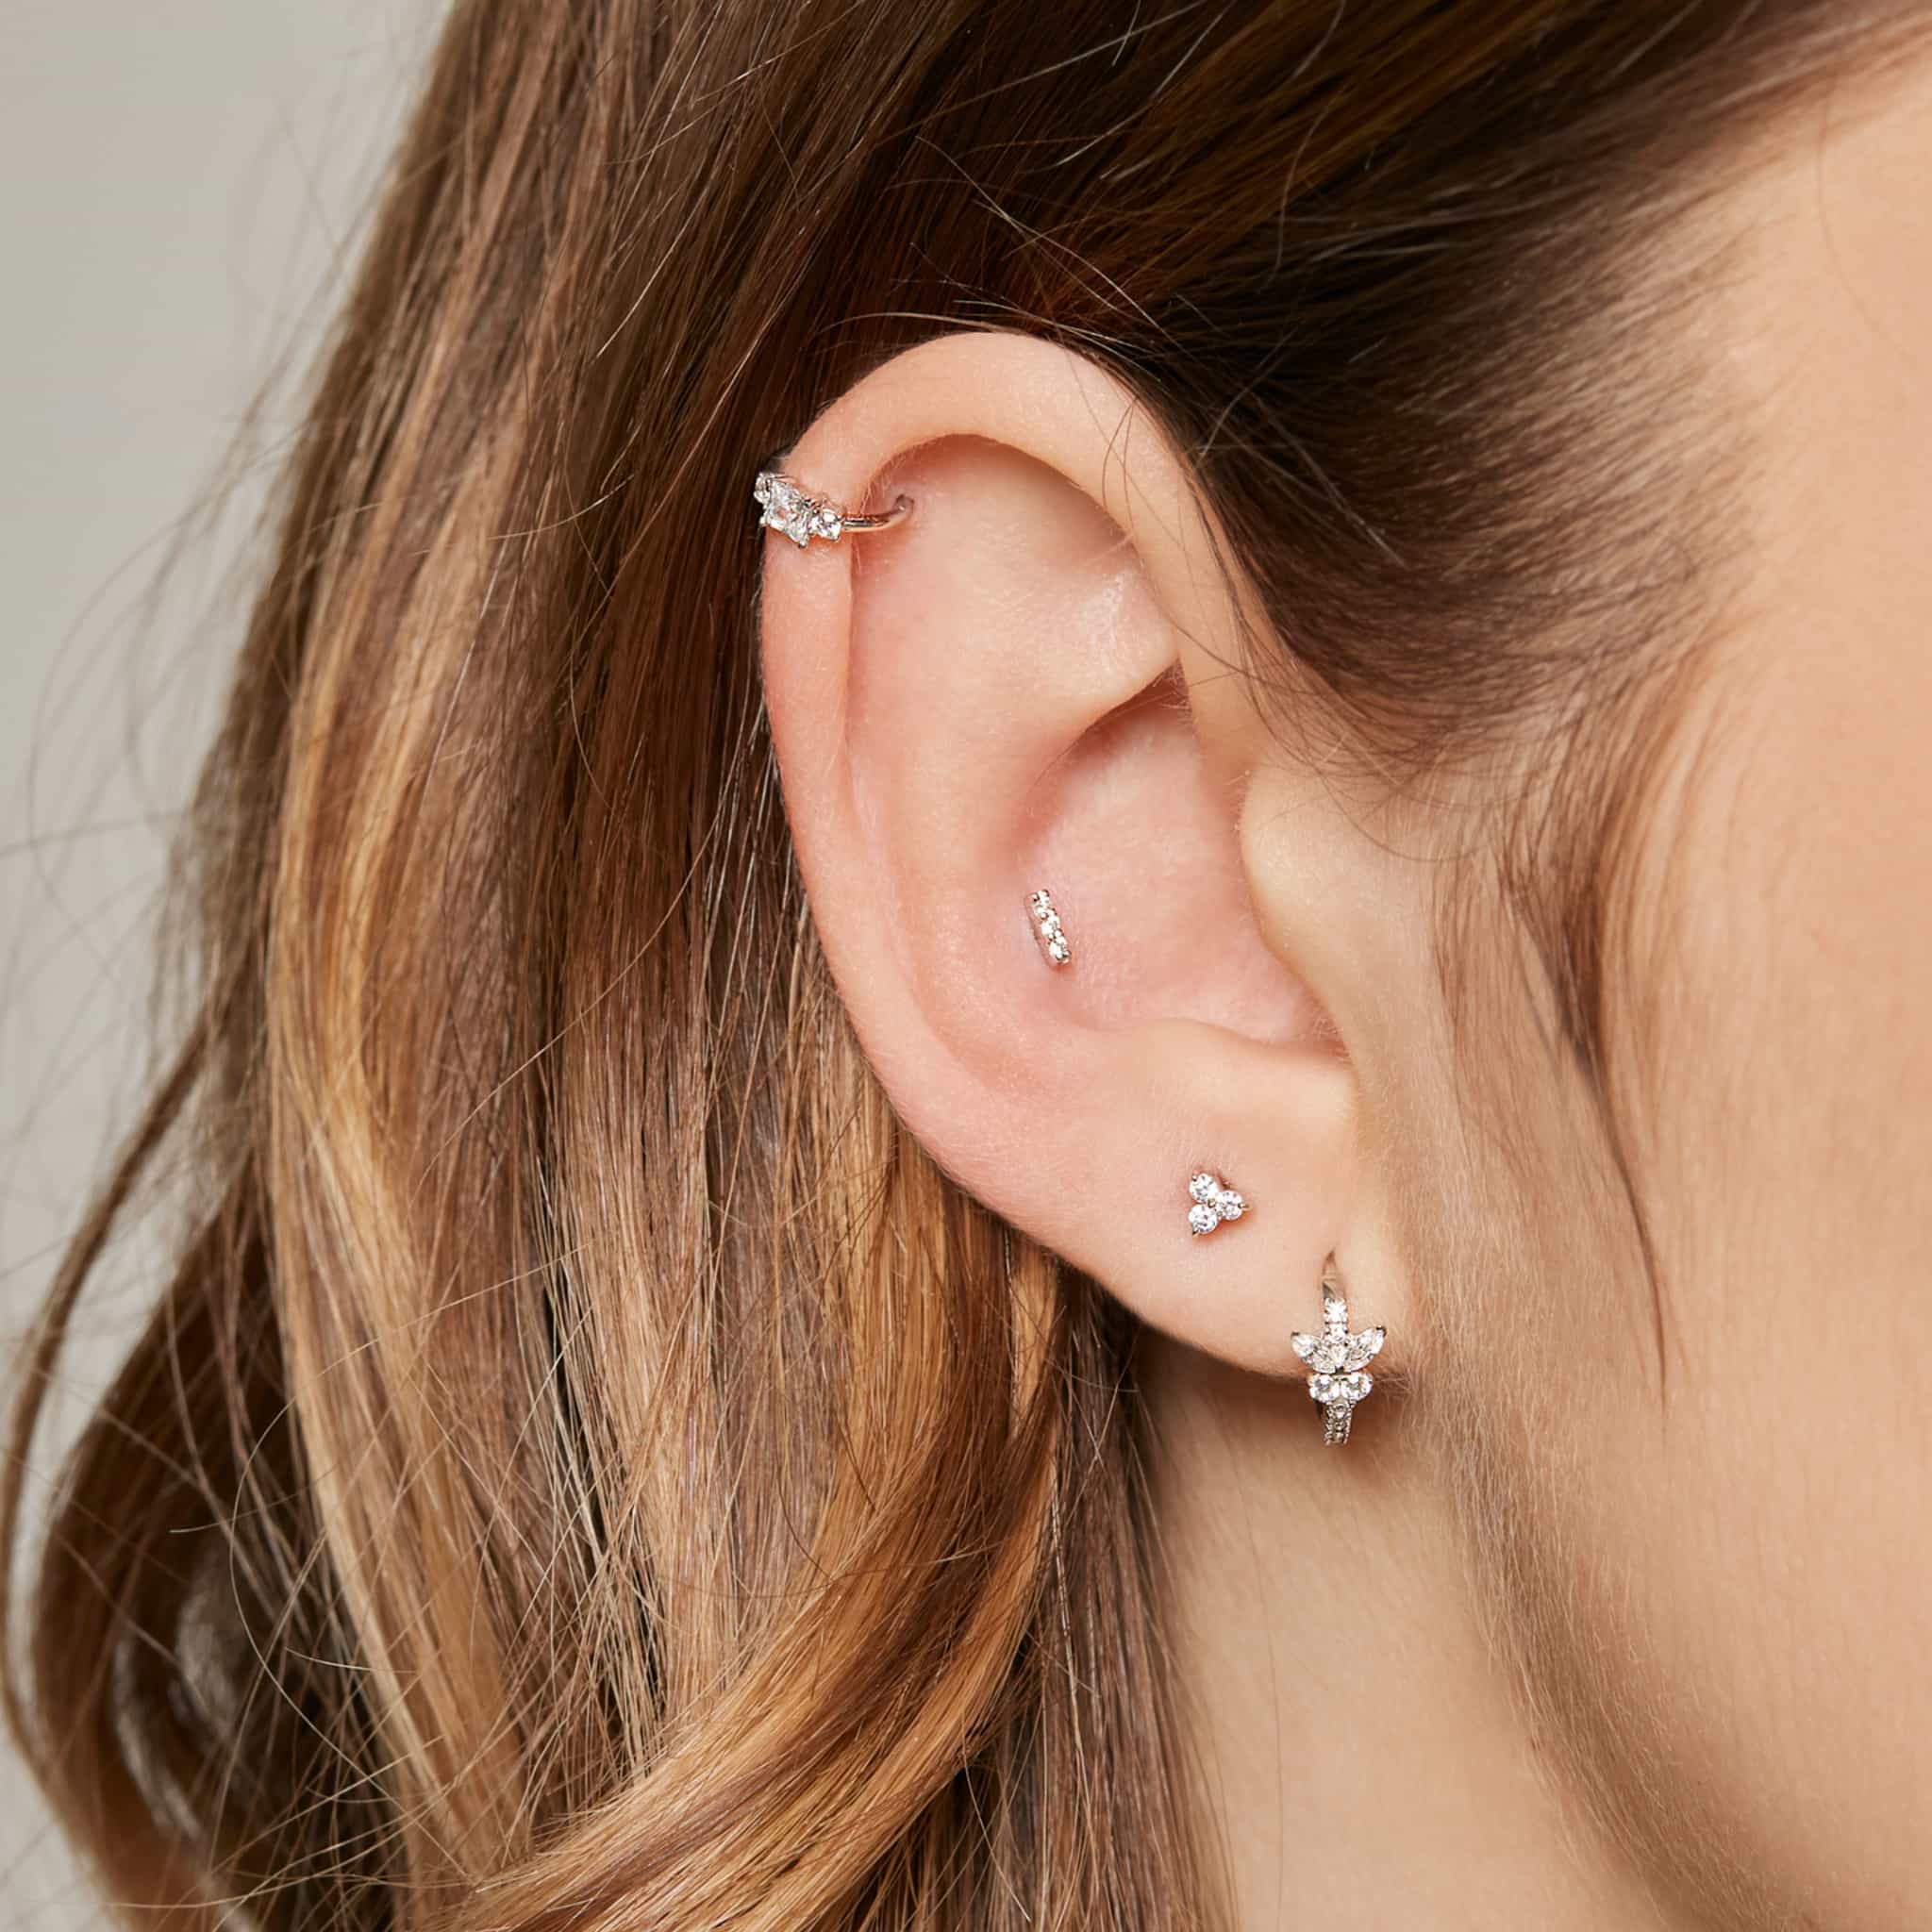 Forward Helix Piercing Guide: Everything You Need to Know | Maison Miru